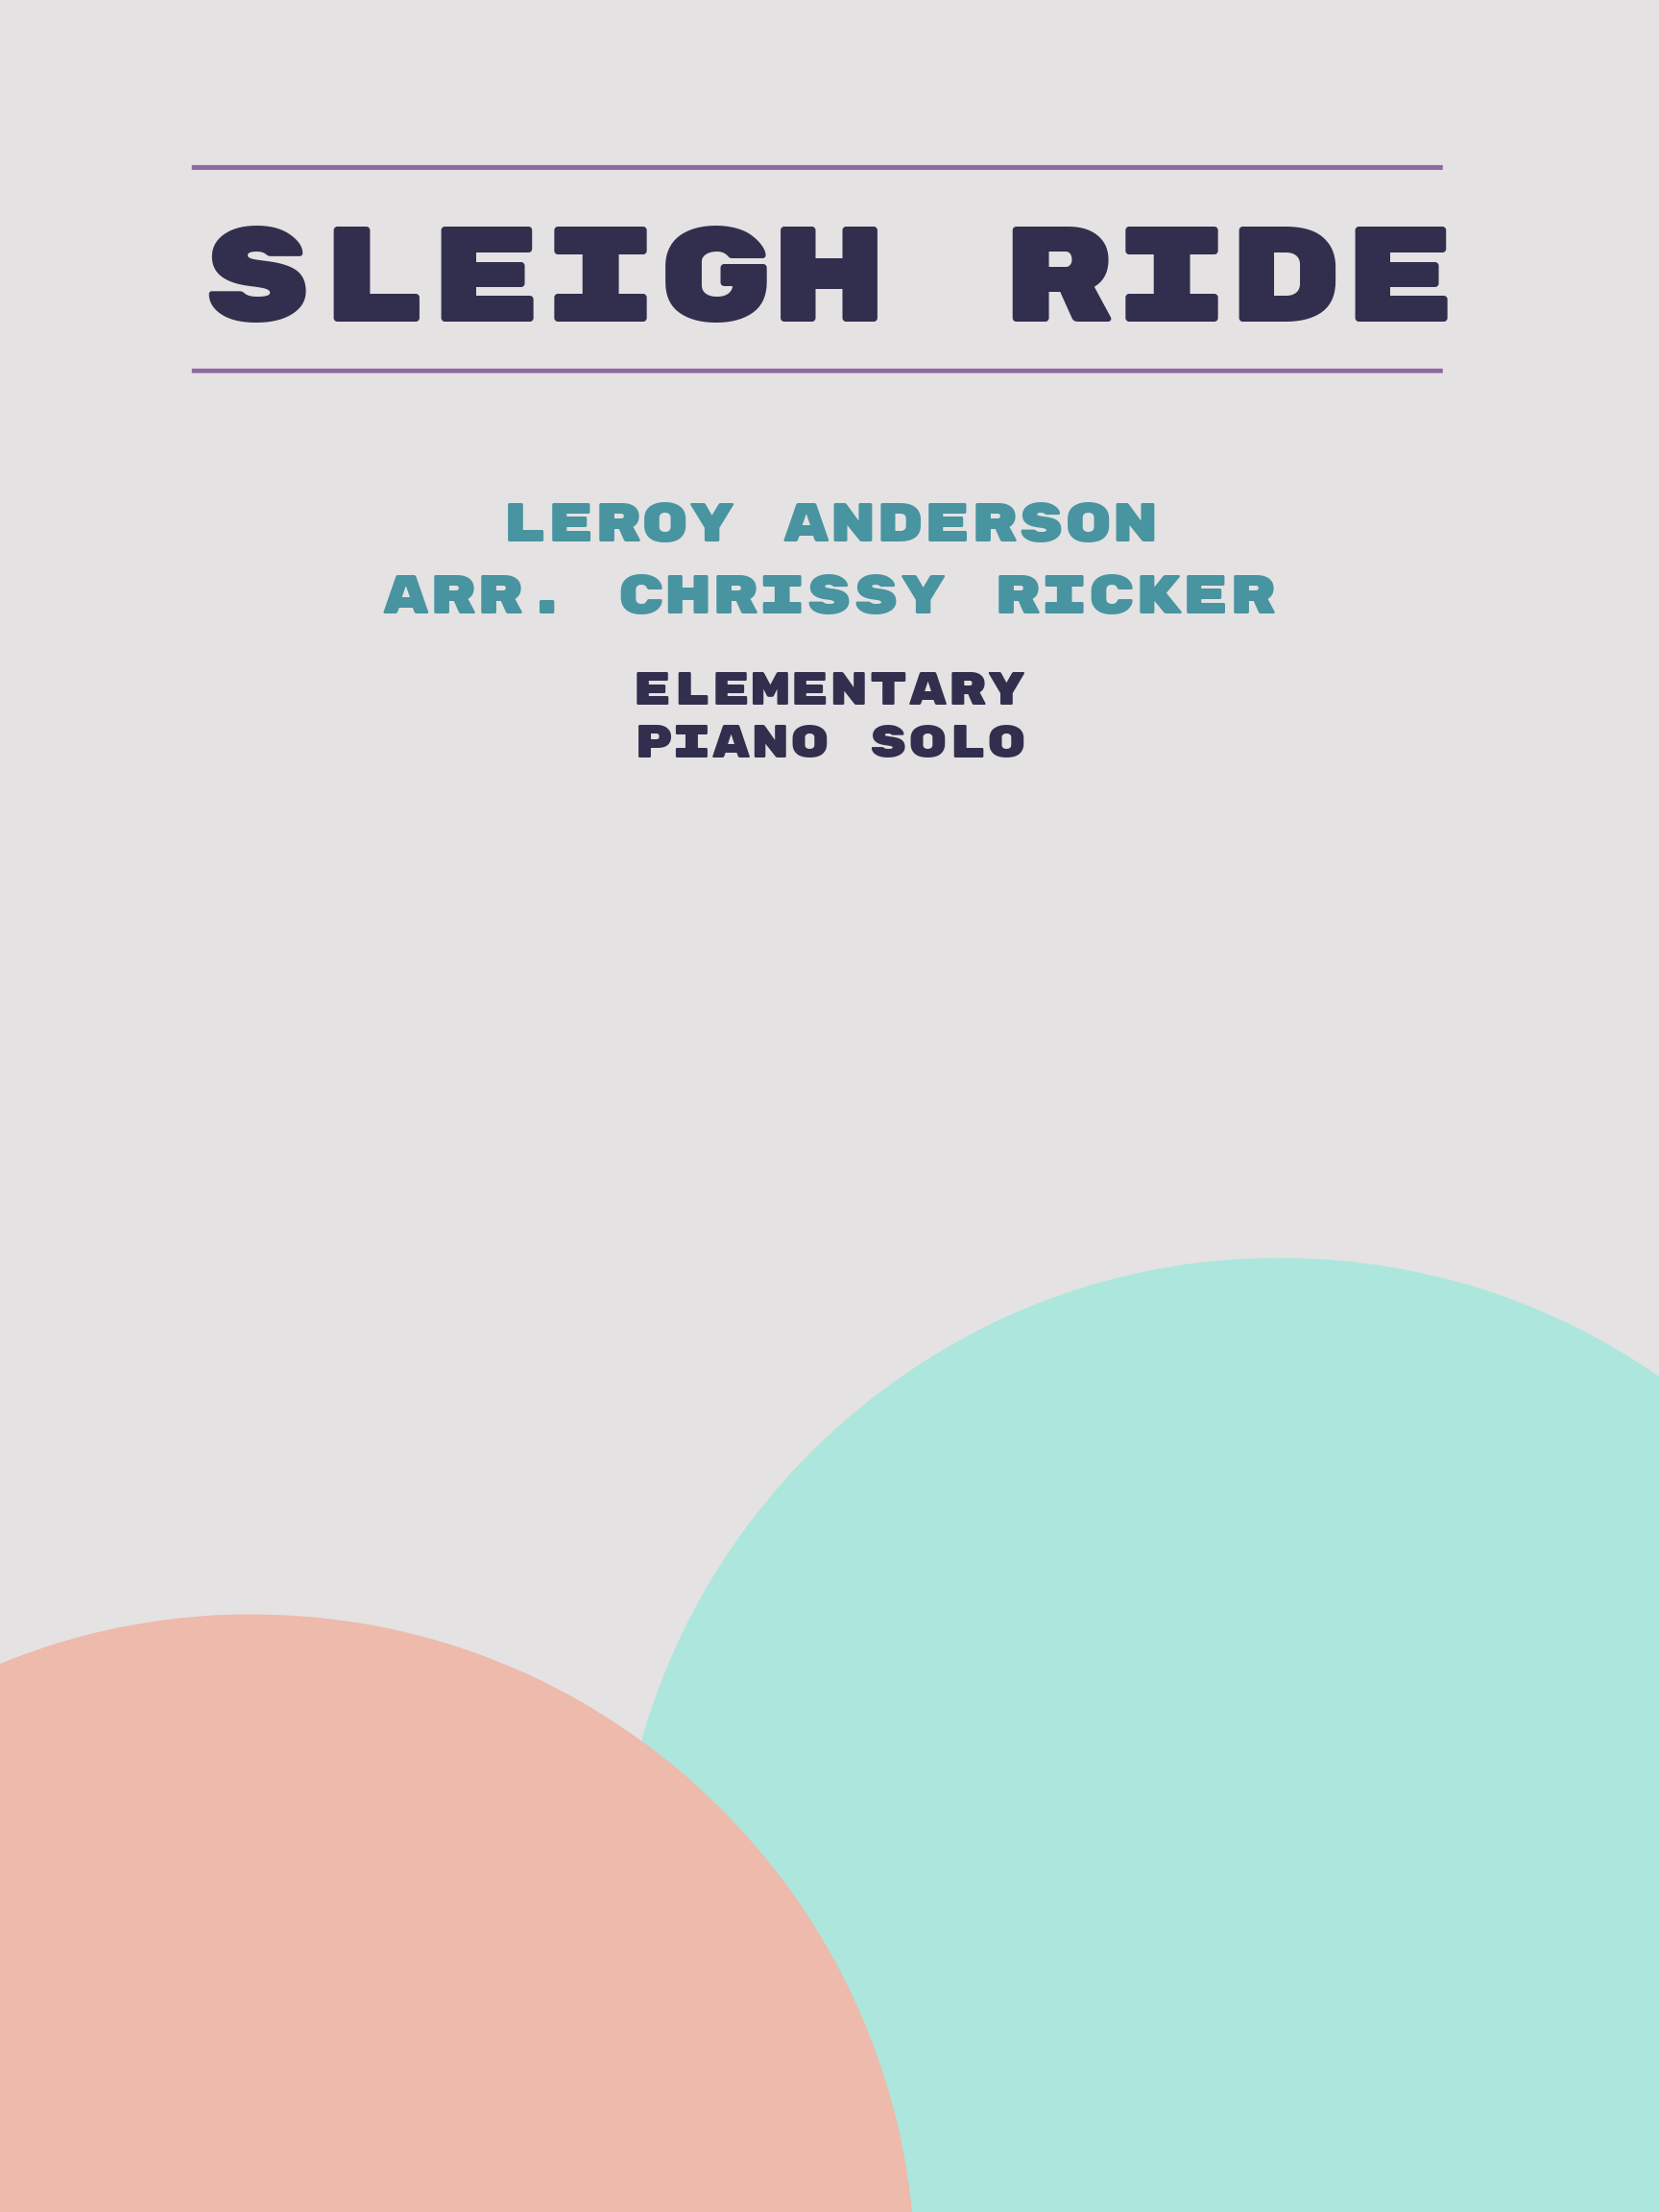 Sleigh Ride by Leroy Anderson